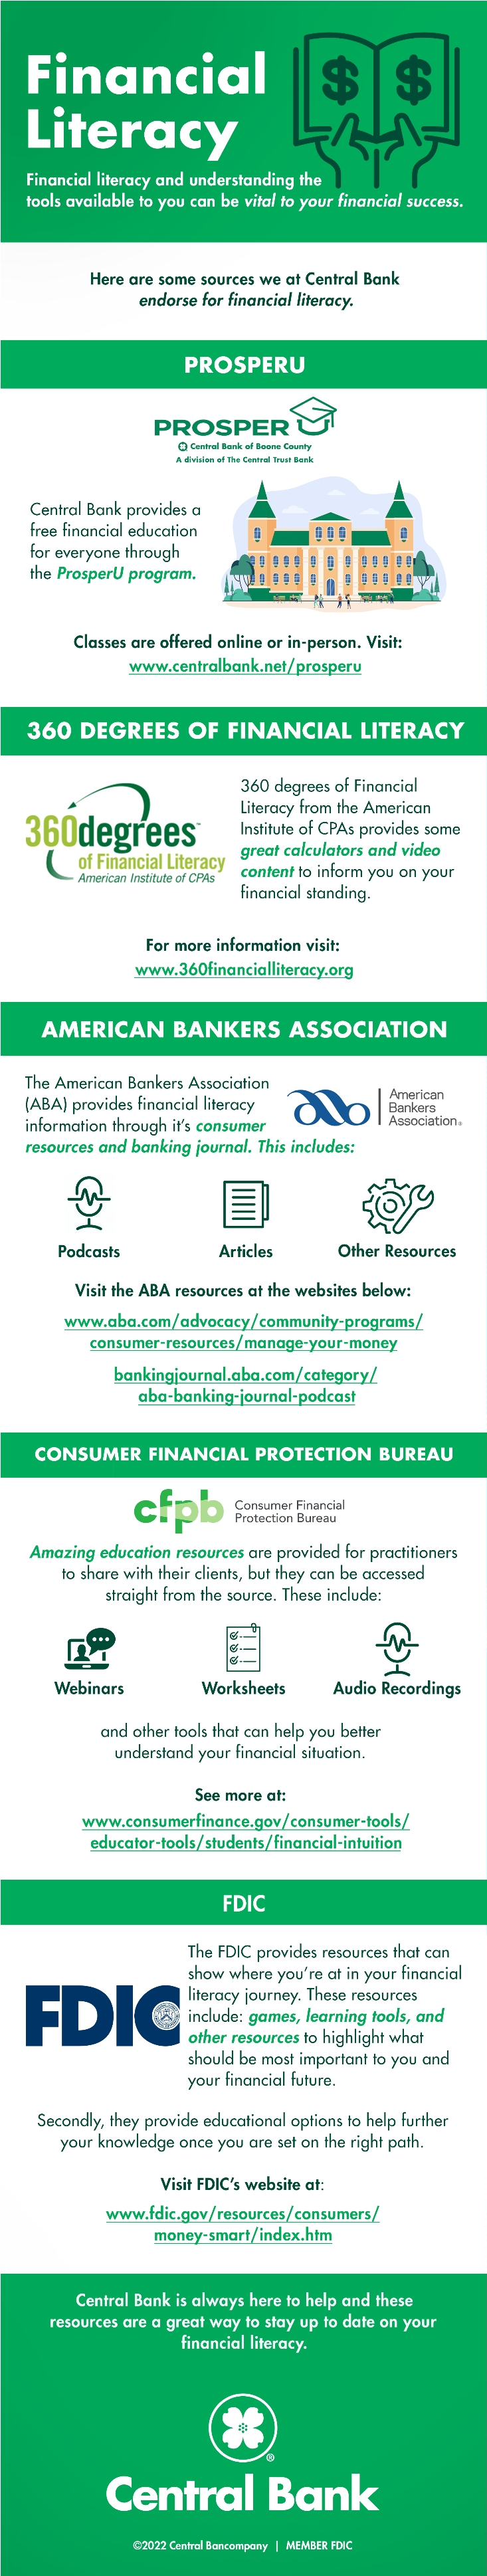 financial literacy infographic